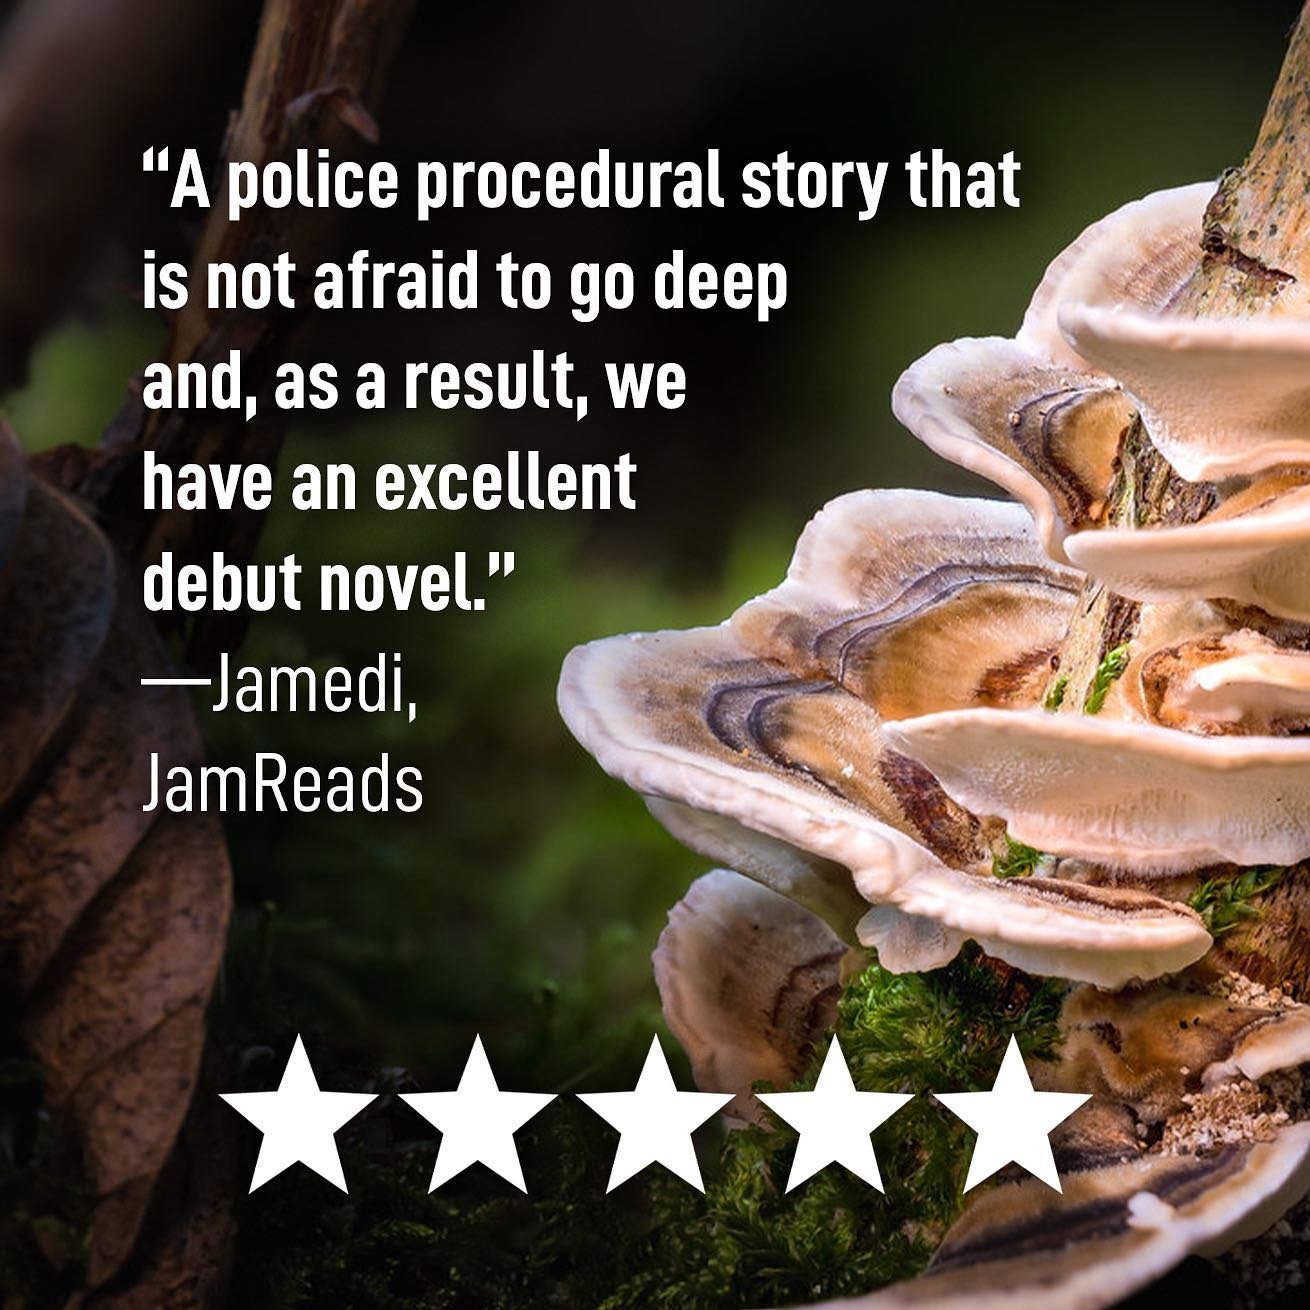 I was so appreciative of @javier_vaquera for helping with the #MushroomBlues cover reveal, but then he dropped this wonderful 5-star review after launch, too! Gracias, amigo 🍄

BUY IT TODAY in paperback/hardcover/eBook on Amazon or read it FREE on K